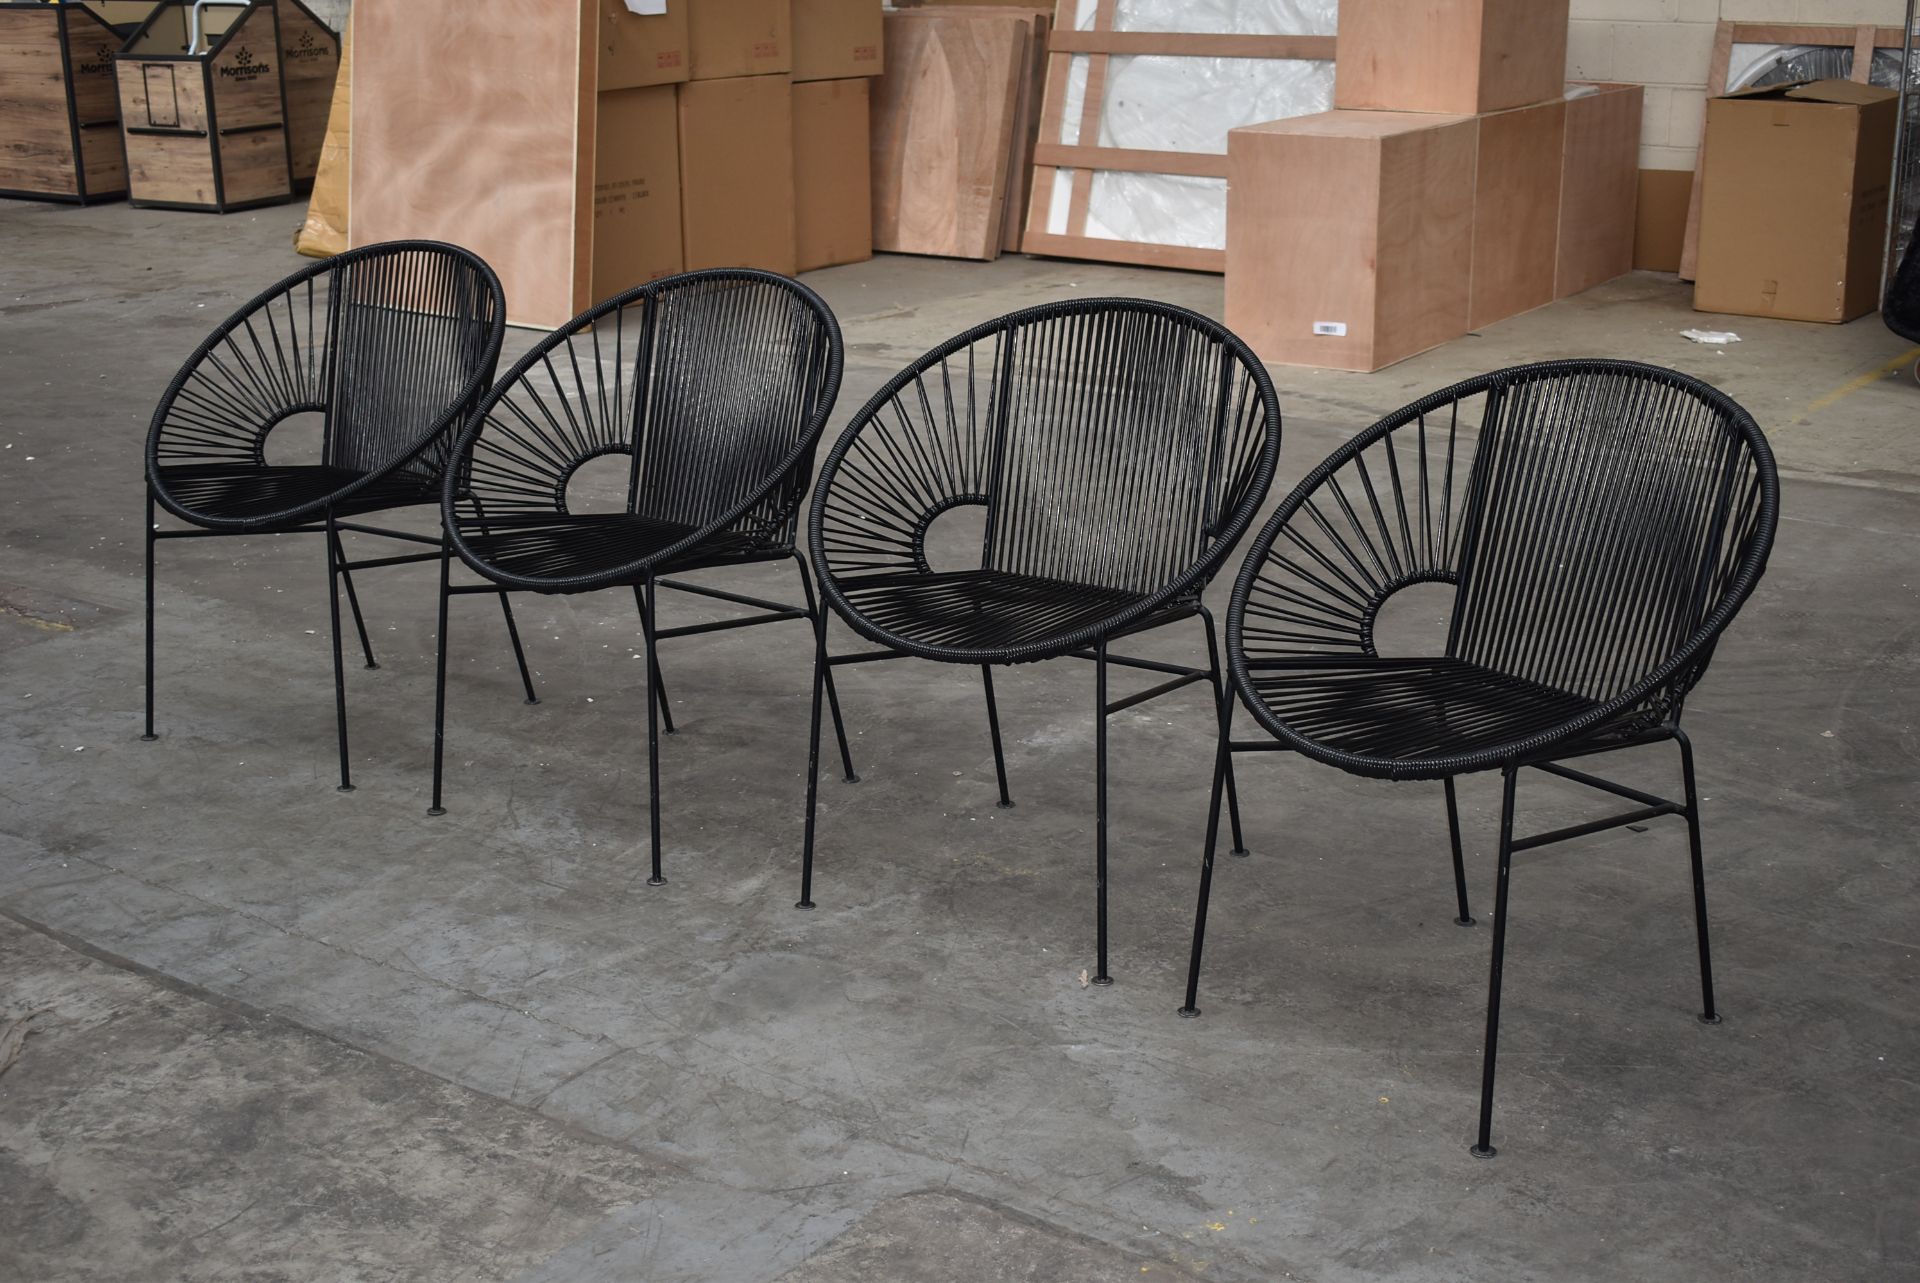 4 x Innit Designer Chairs - Acapulco Style Chairs in Black Suitable For Indoor or Outdoor Use - - Image 2 of 11